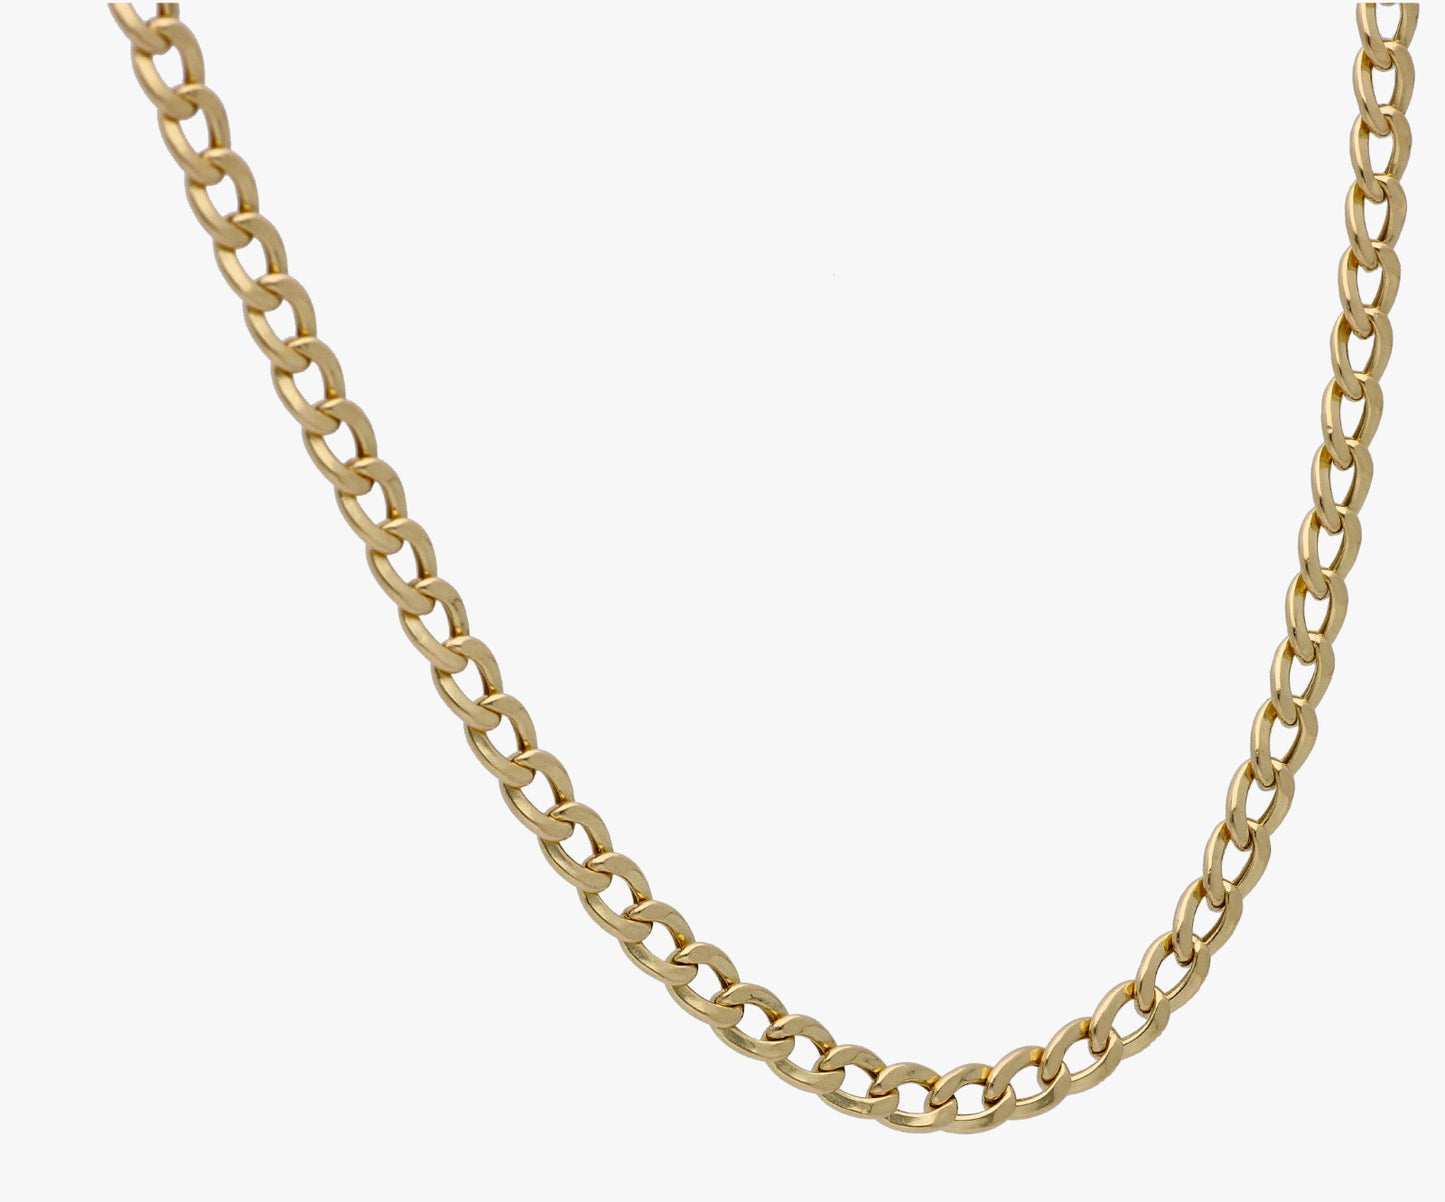 Gold 18 Inches Curb Chain in 18KT - FKJCN18KU6319